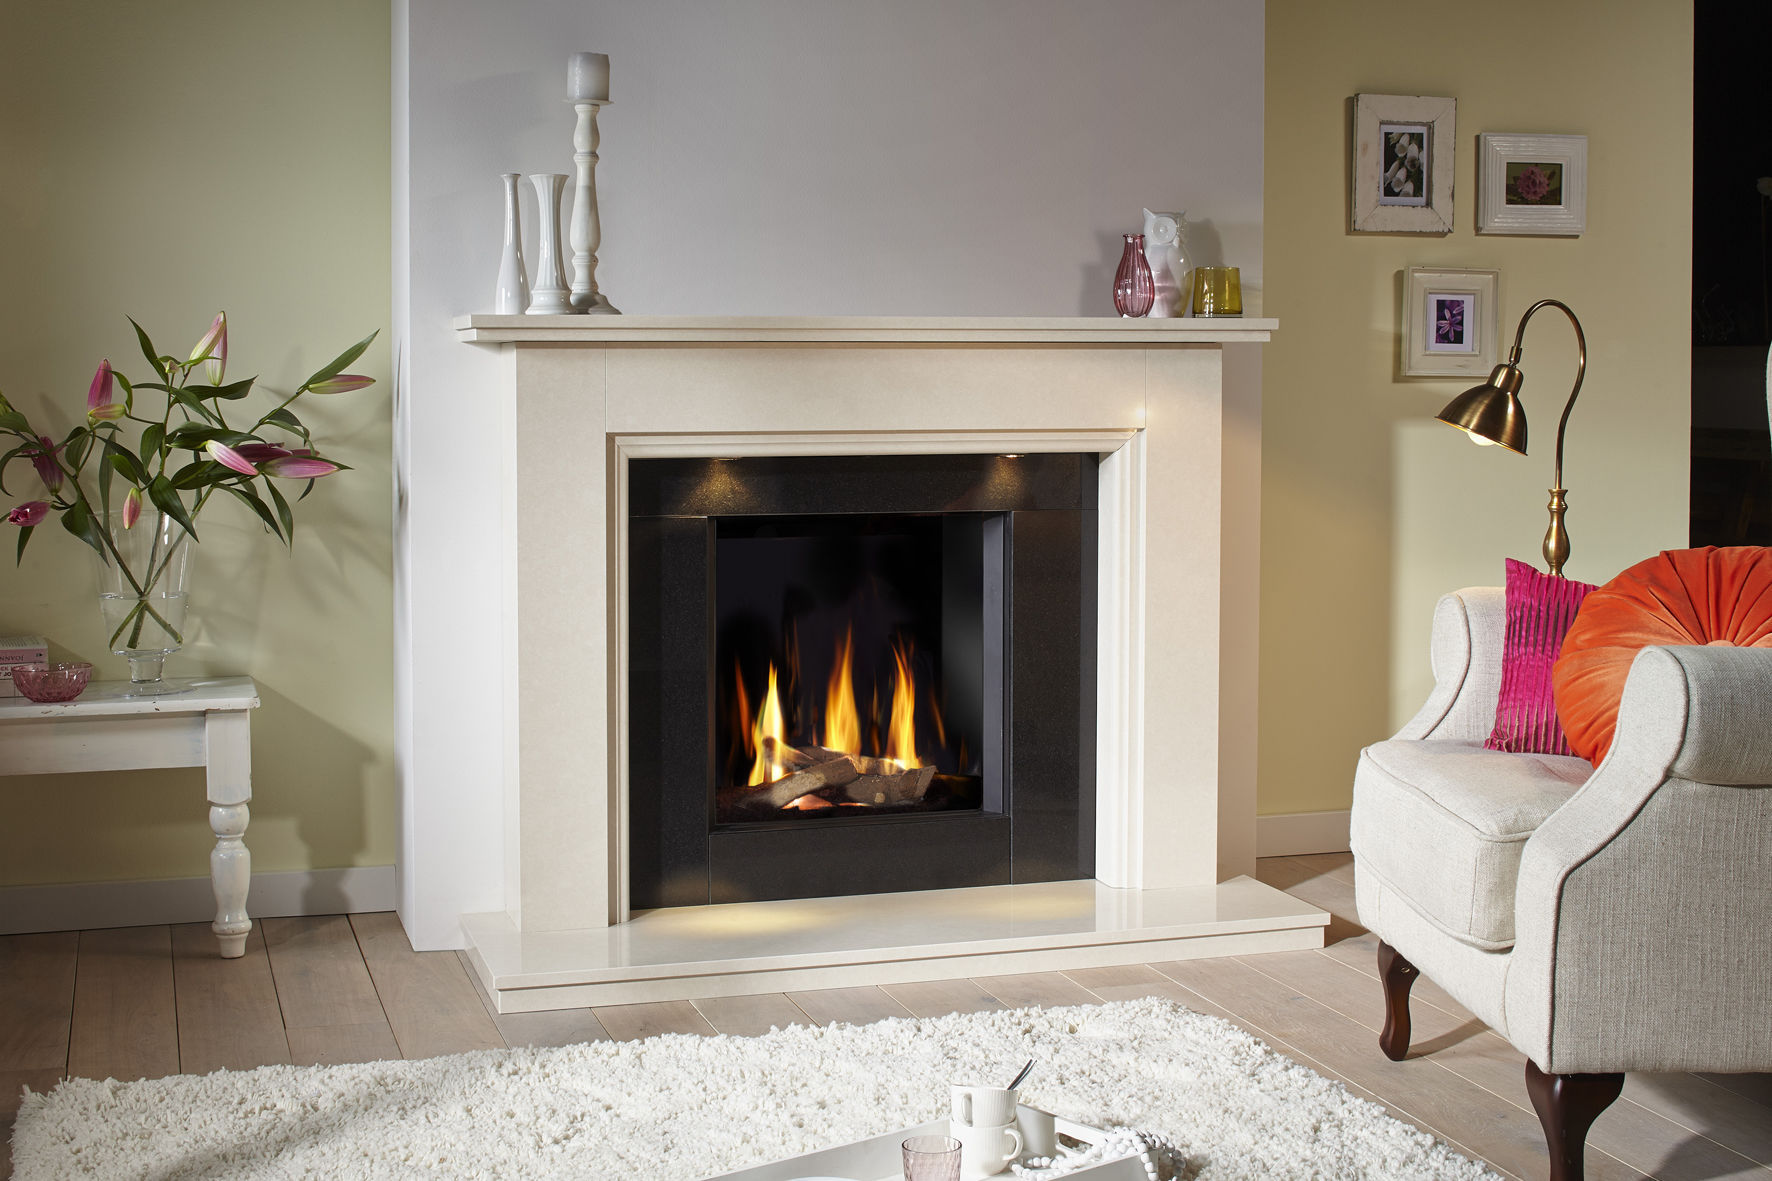 Gas-fireplaces-and-wood-burning. Top 10 Outdated Home Decorating Trends to Avoid in 2021